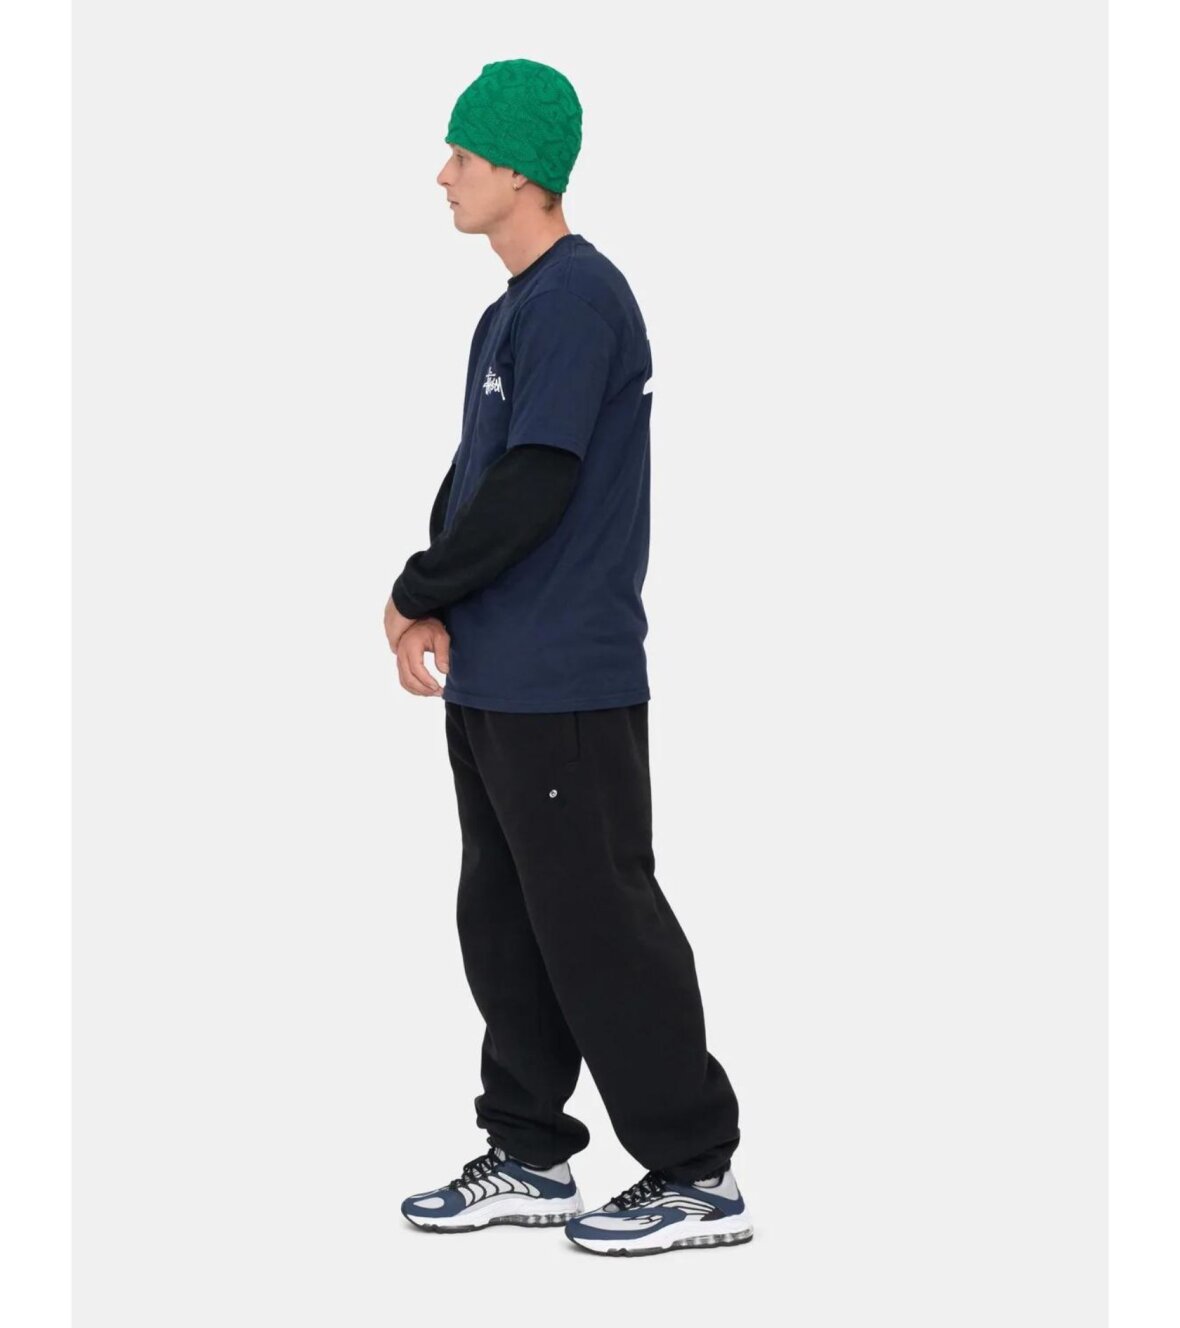 dr. Adams - Stüssy 8 Ball Embroidered Pant Black